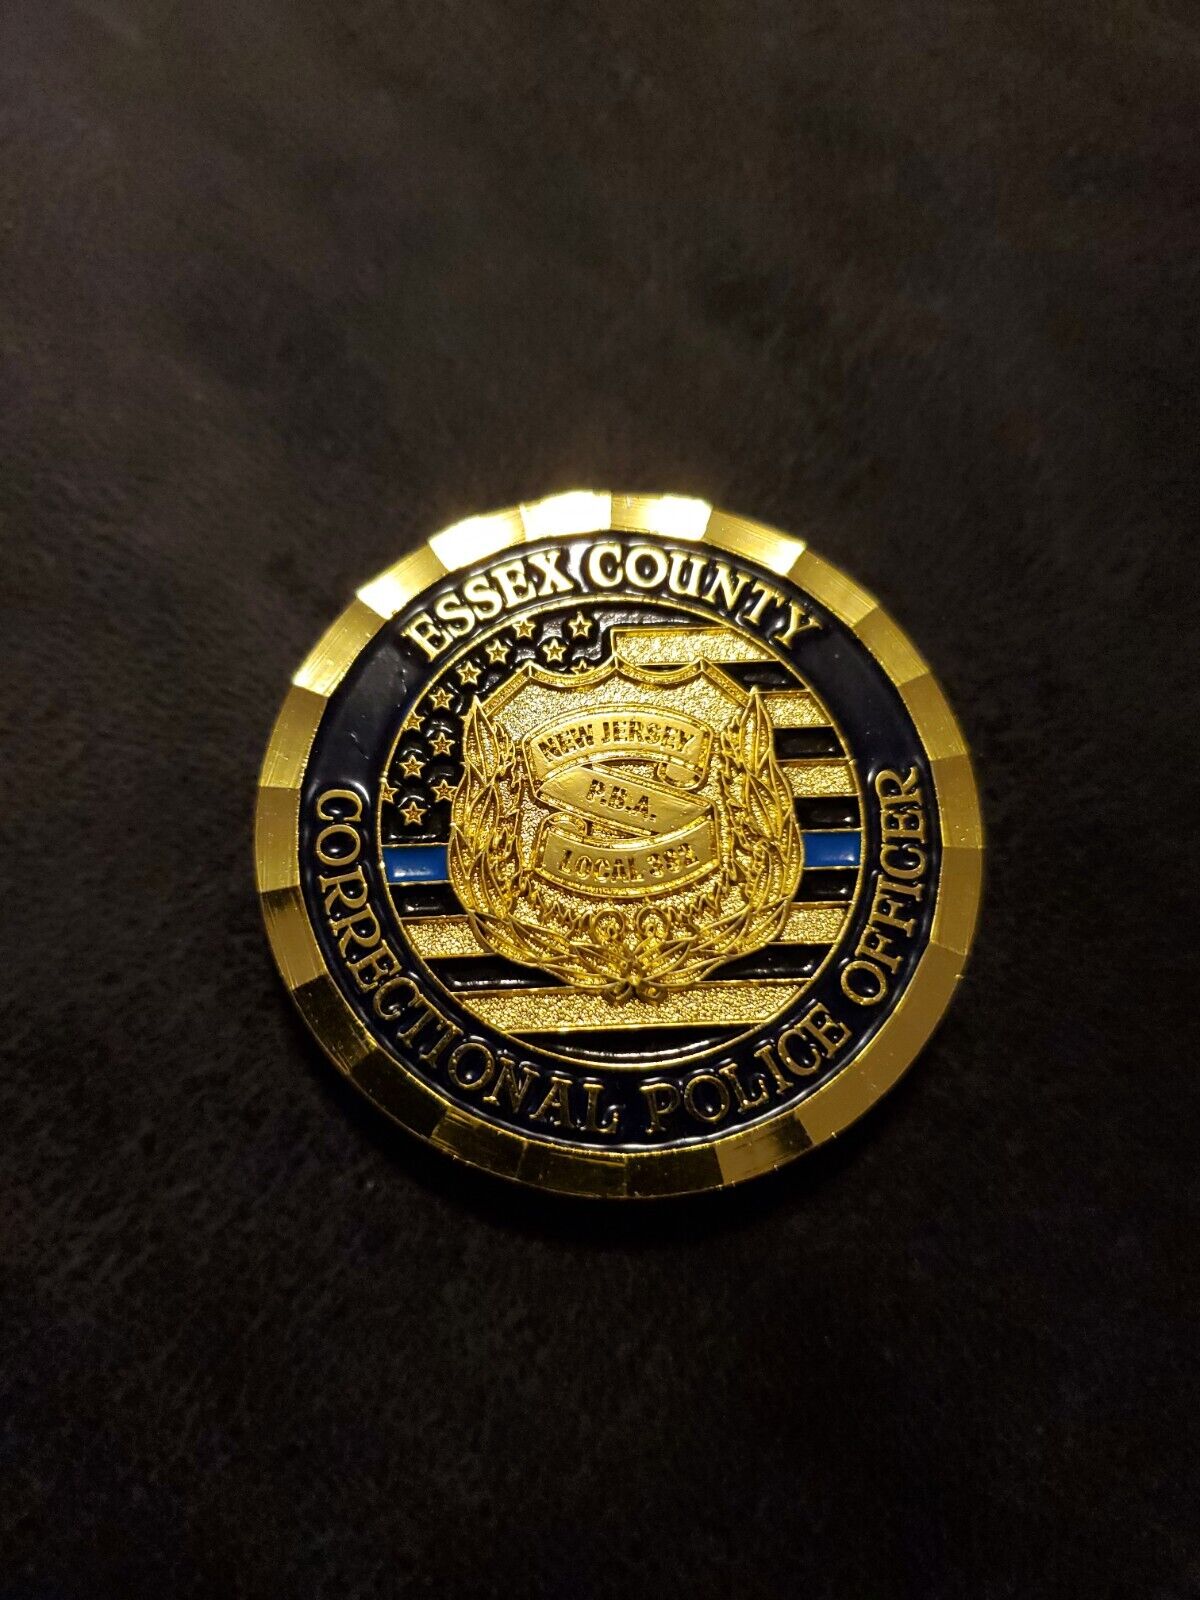 Essex County Nj Correctional Police Challenge Coin